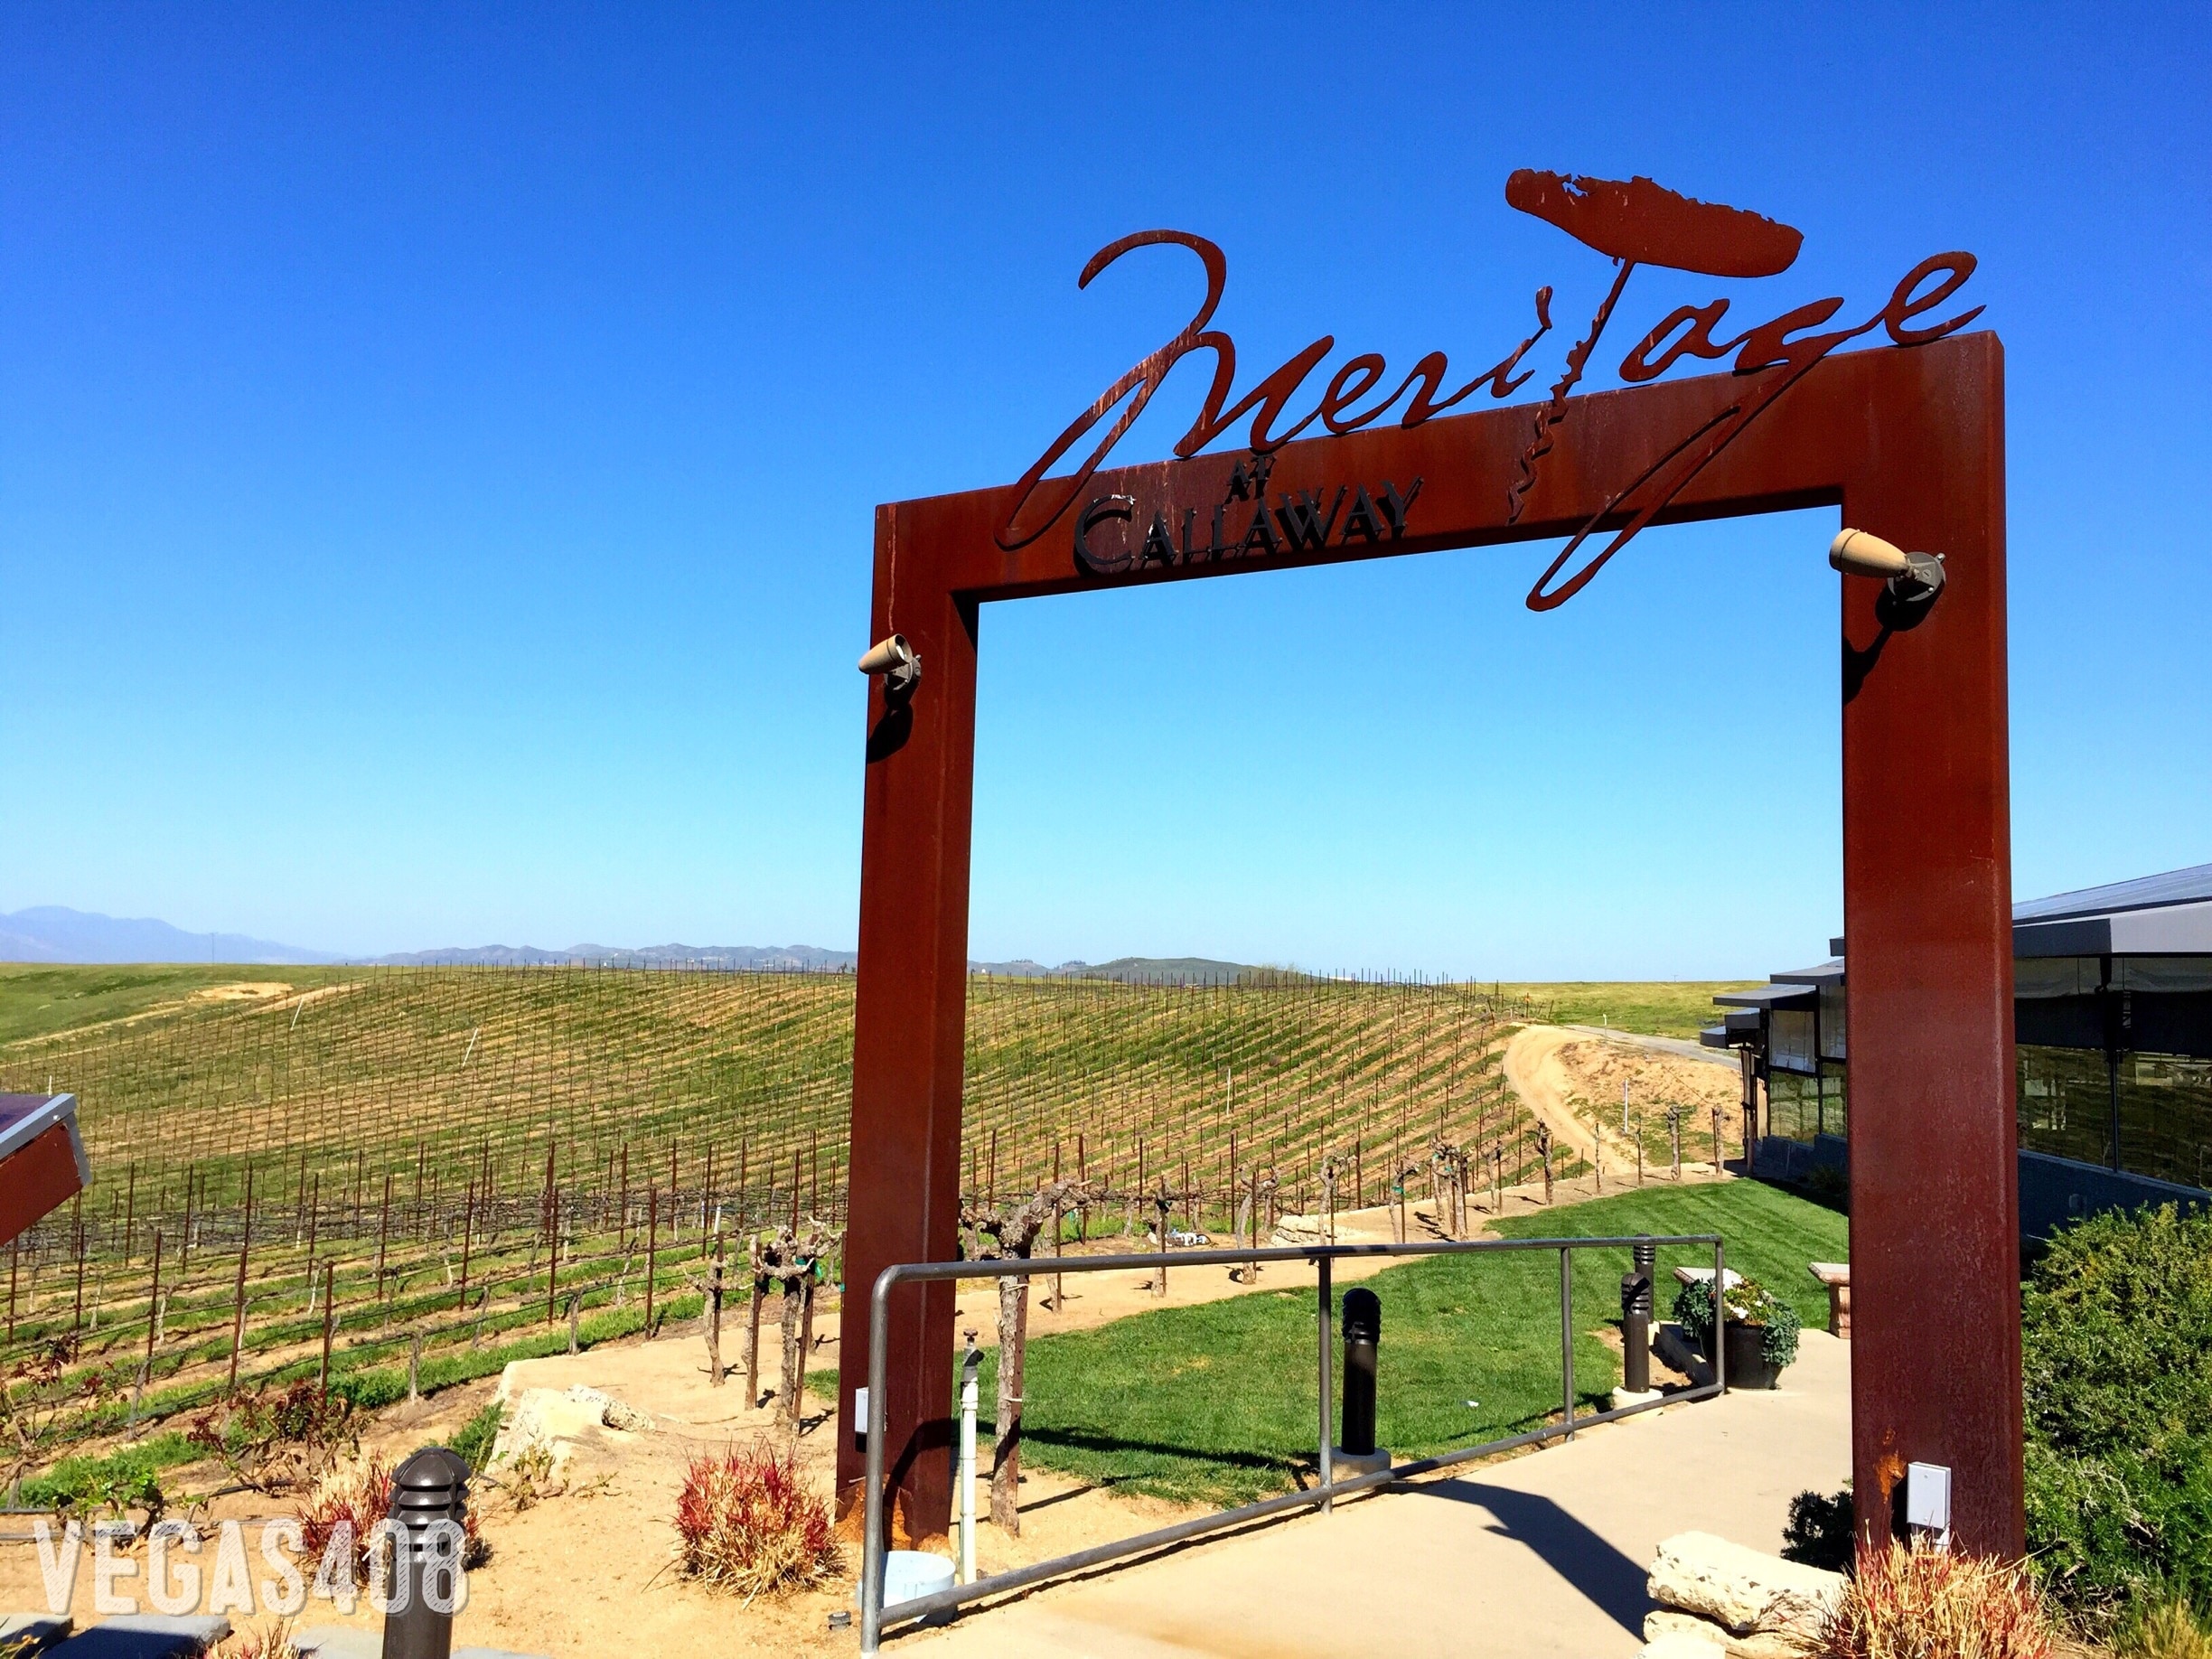 Visit Temecula Valley Wine Country Best of Temecula Valley Wine